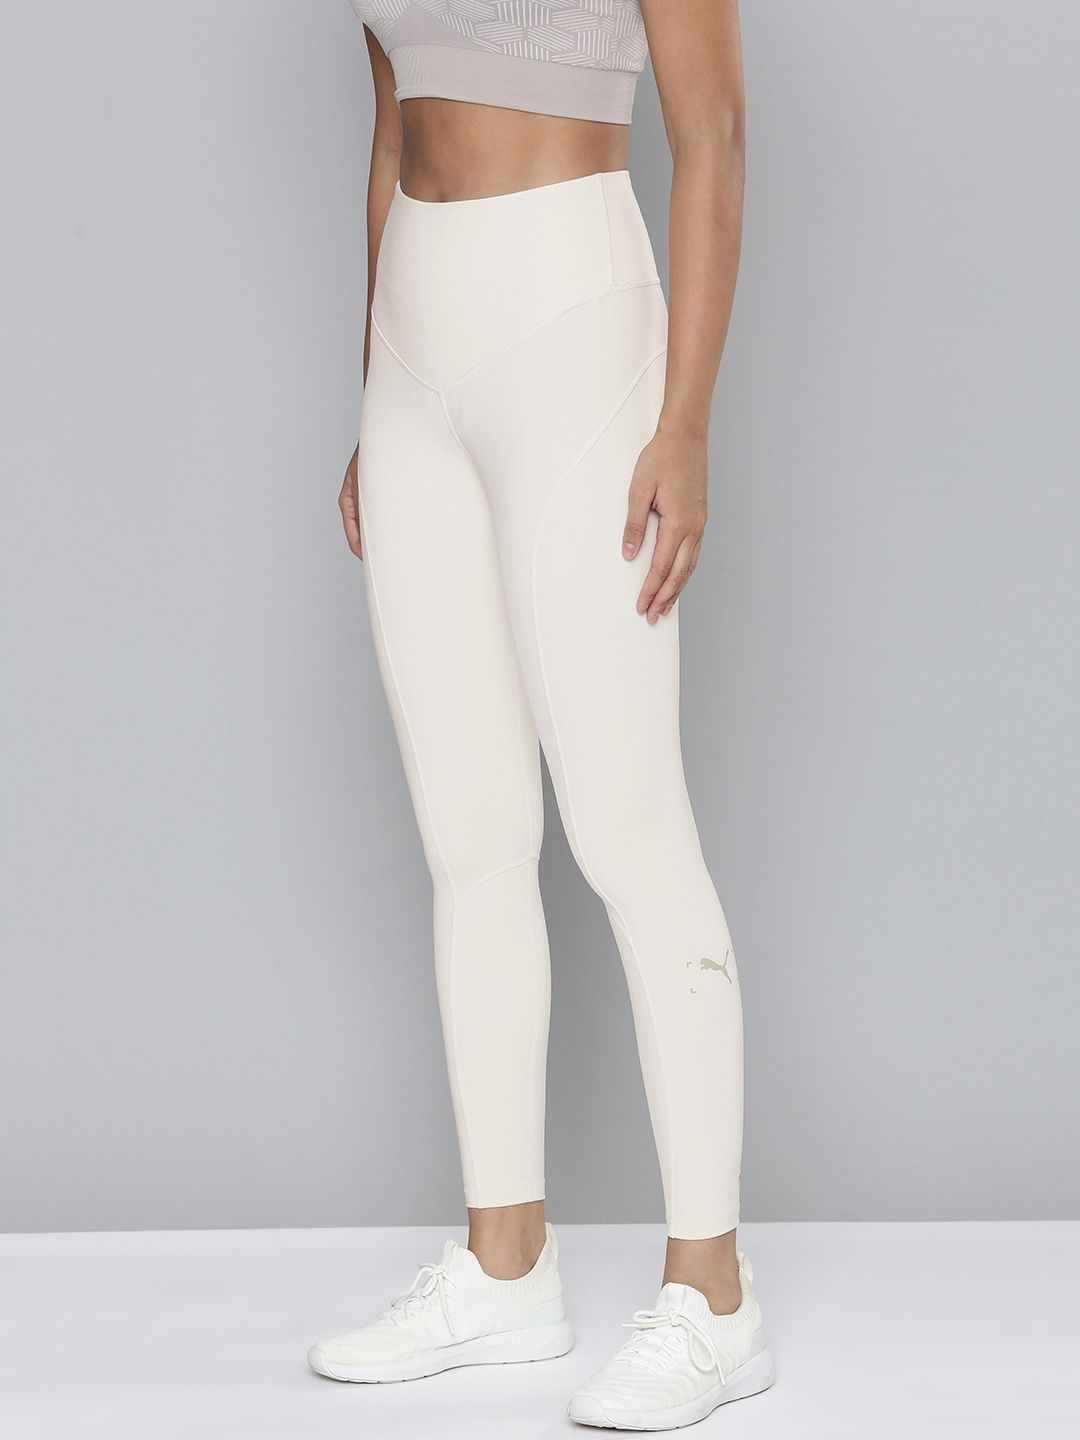 Puma Women White Solid dryCELL RE.COLLECTION 7/8 Training Tights Price in India